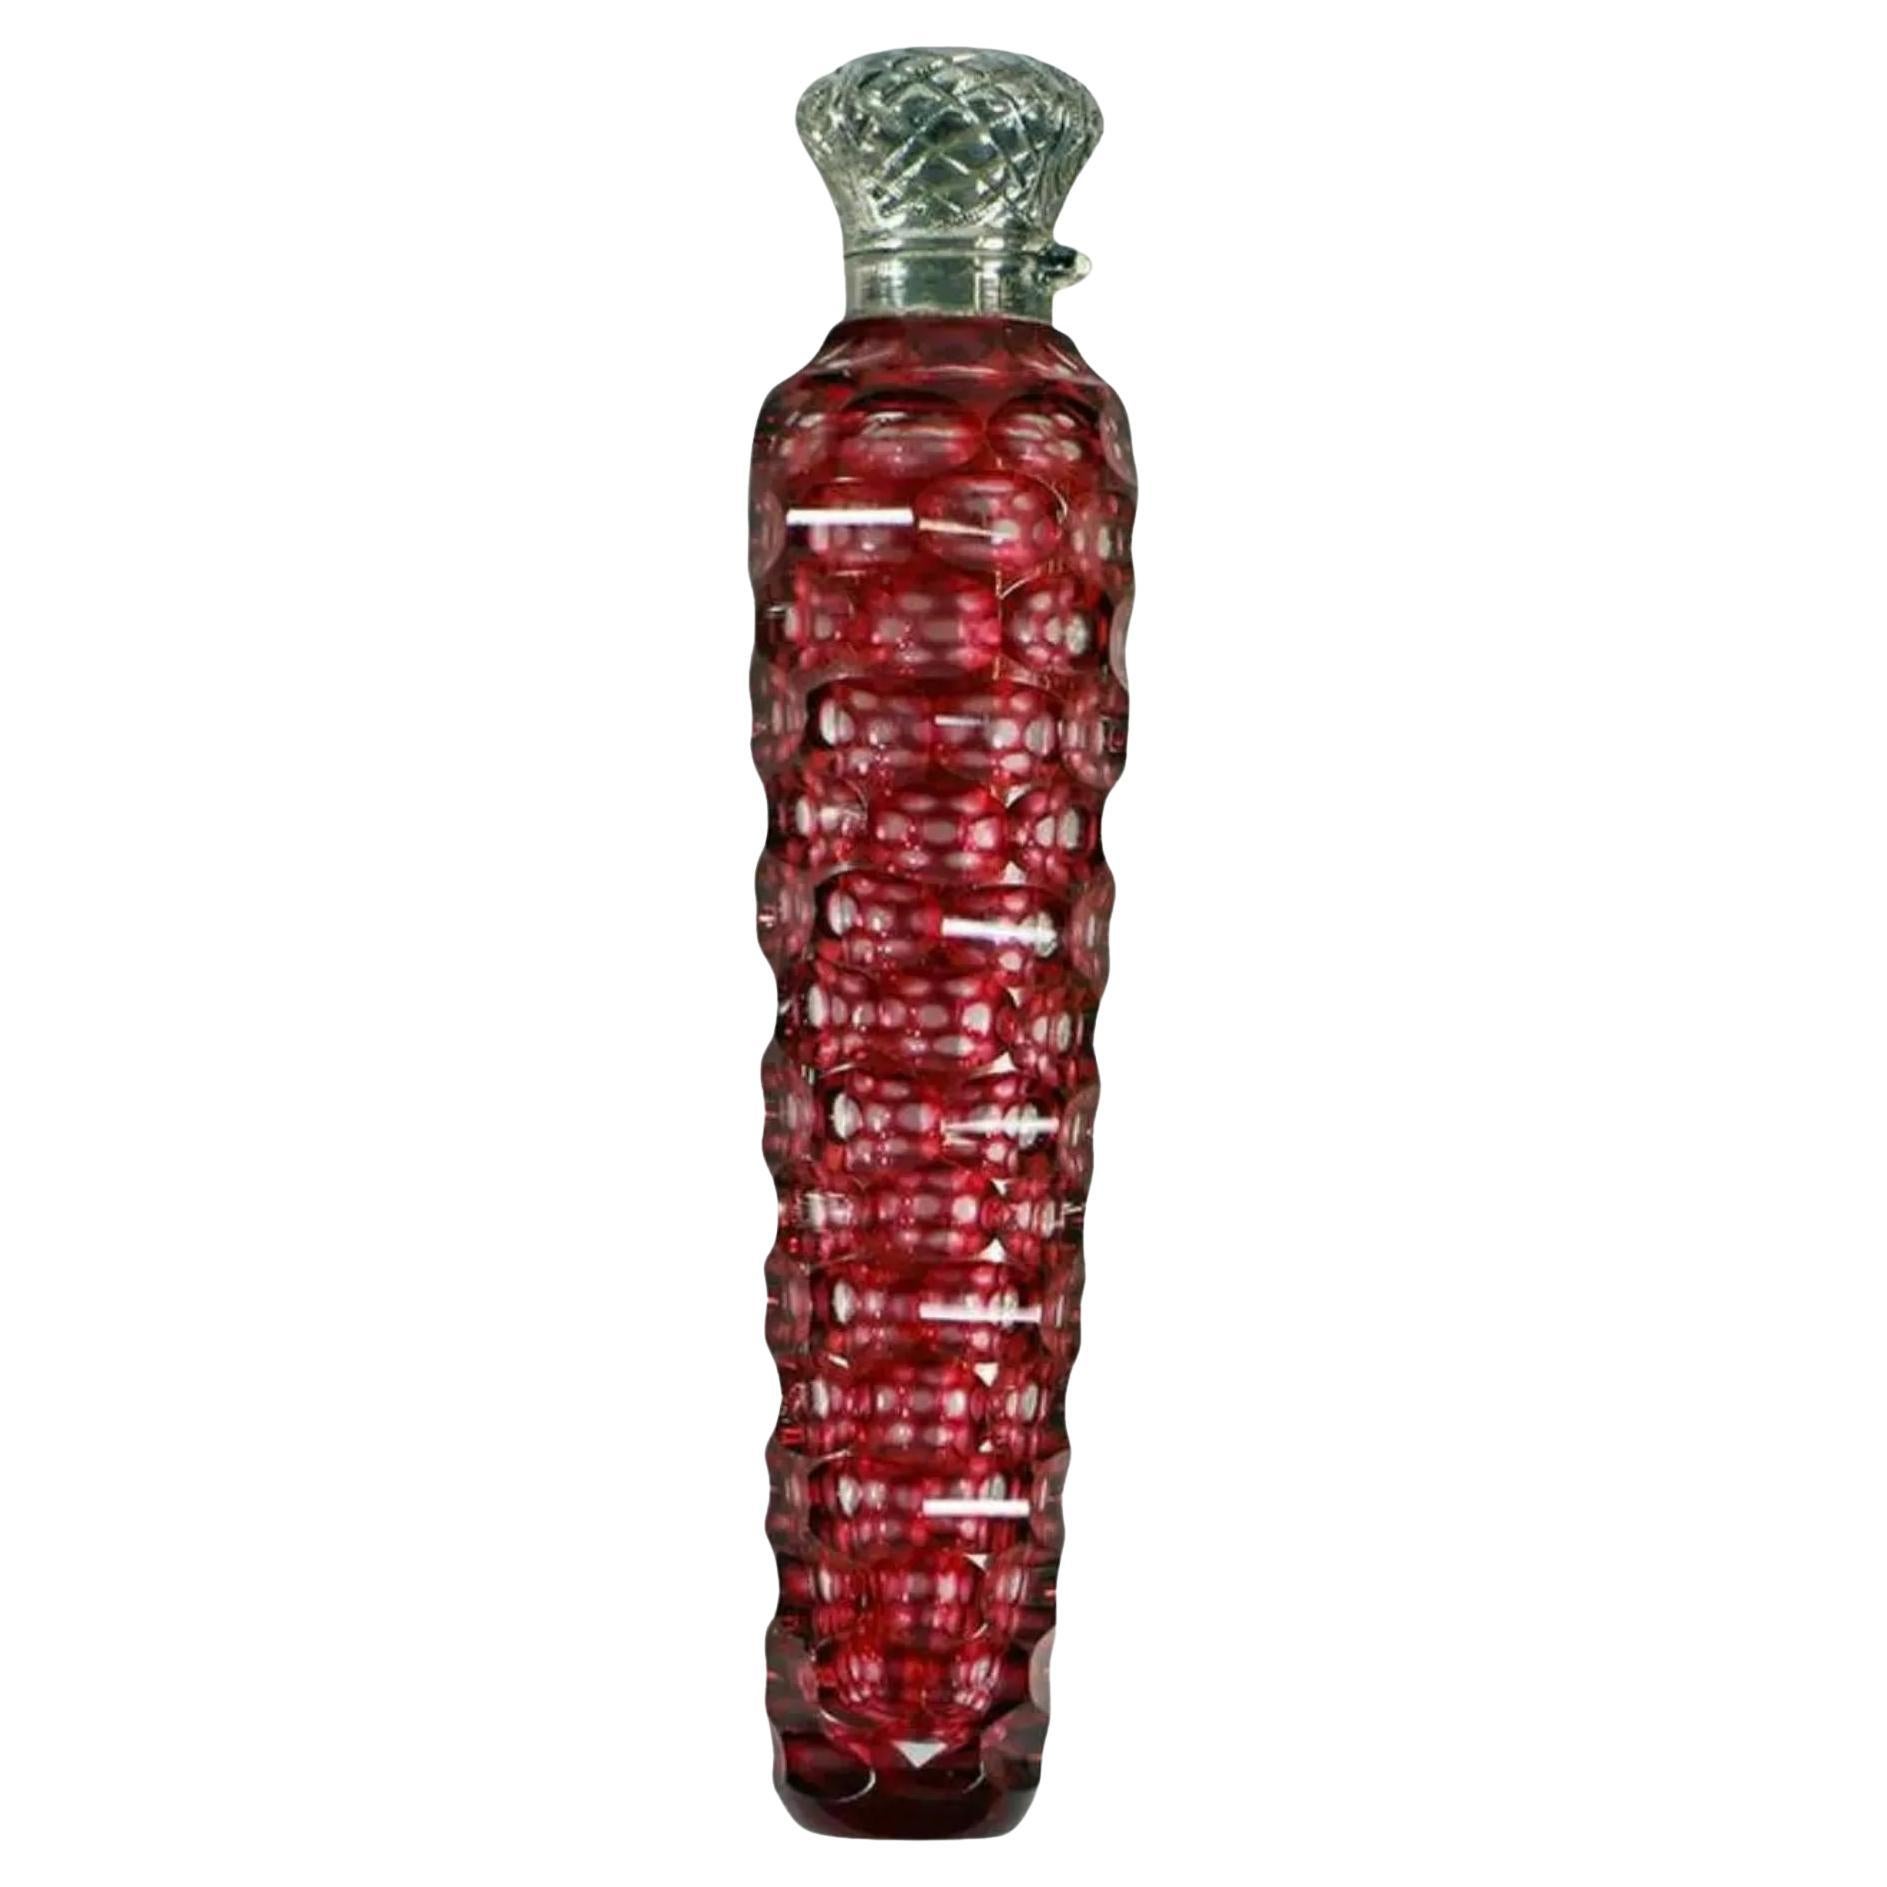 Antique Sterling Silver Mounted Red Cut Crystal Perfume Flask Bottle